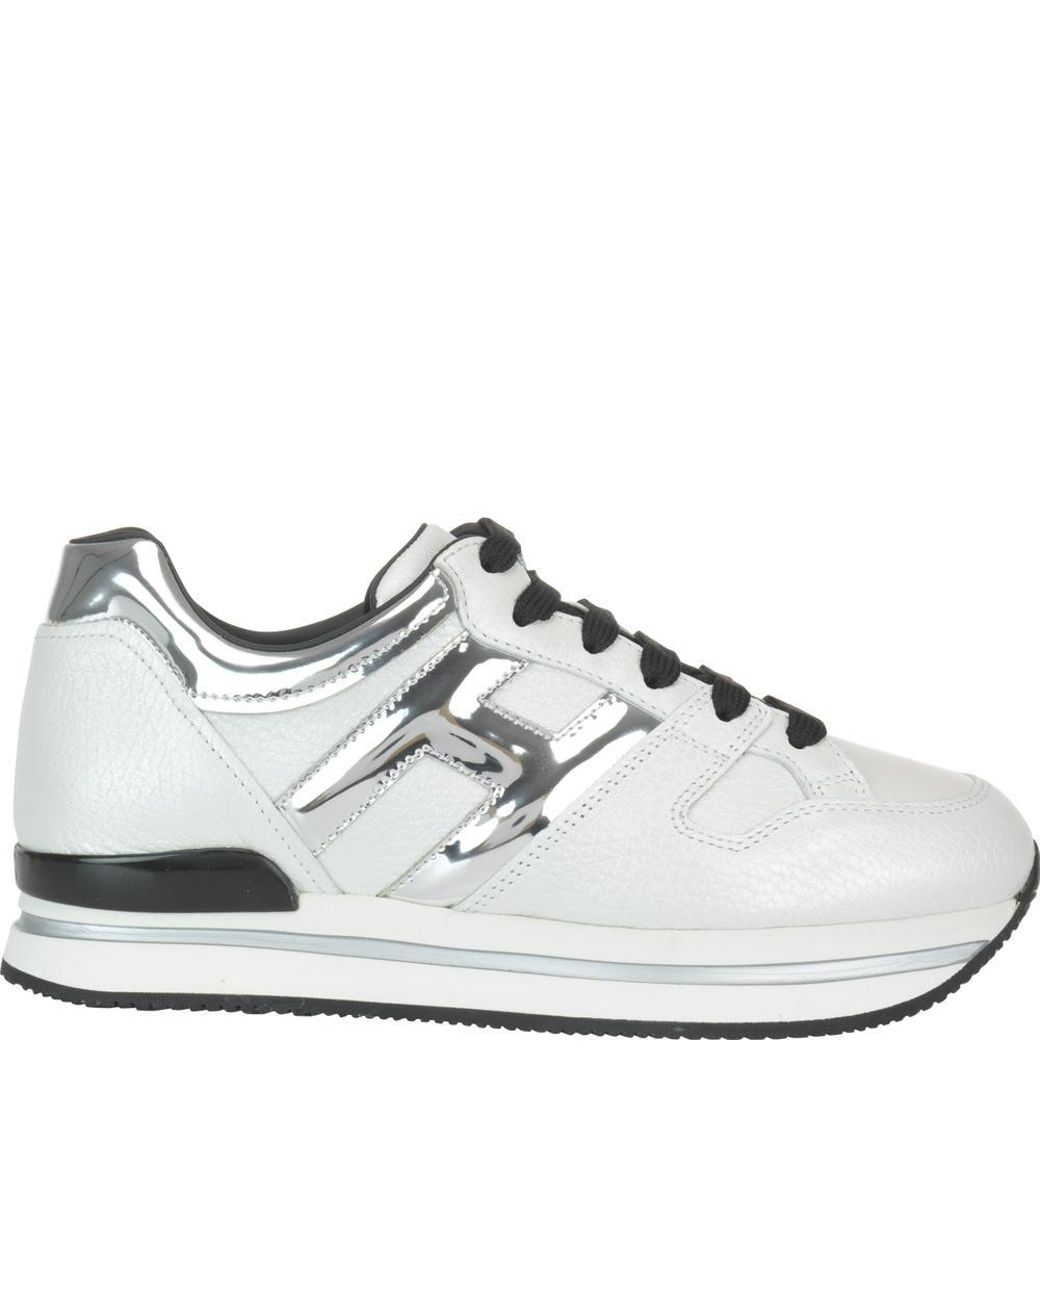 Hogan Leather H222 Sneakers in White - Save 1% - Lyst